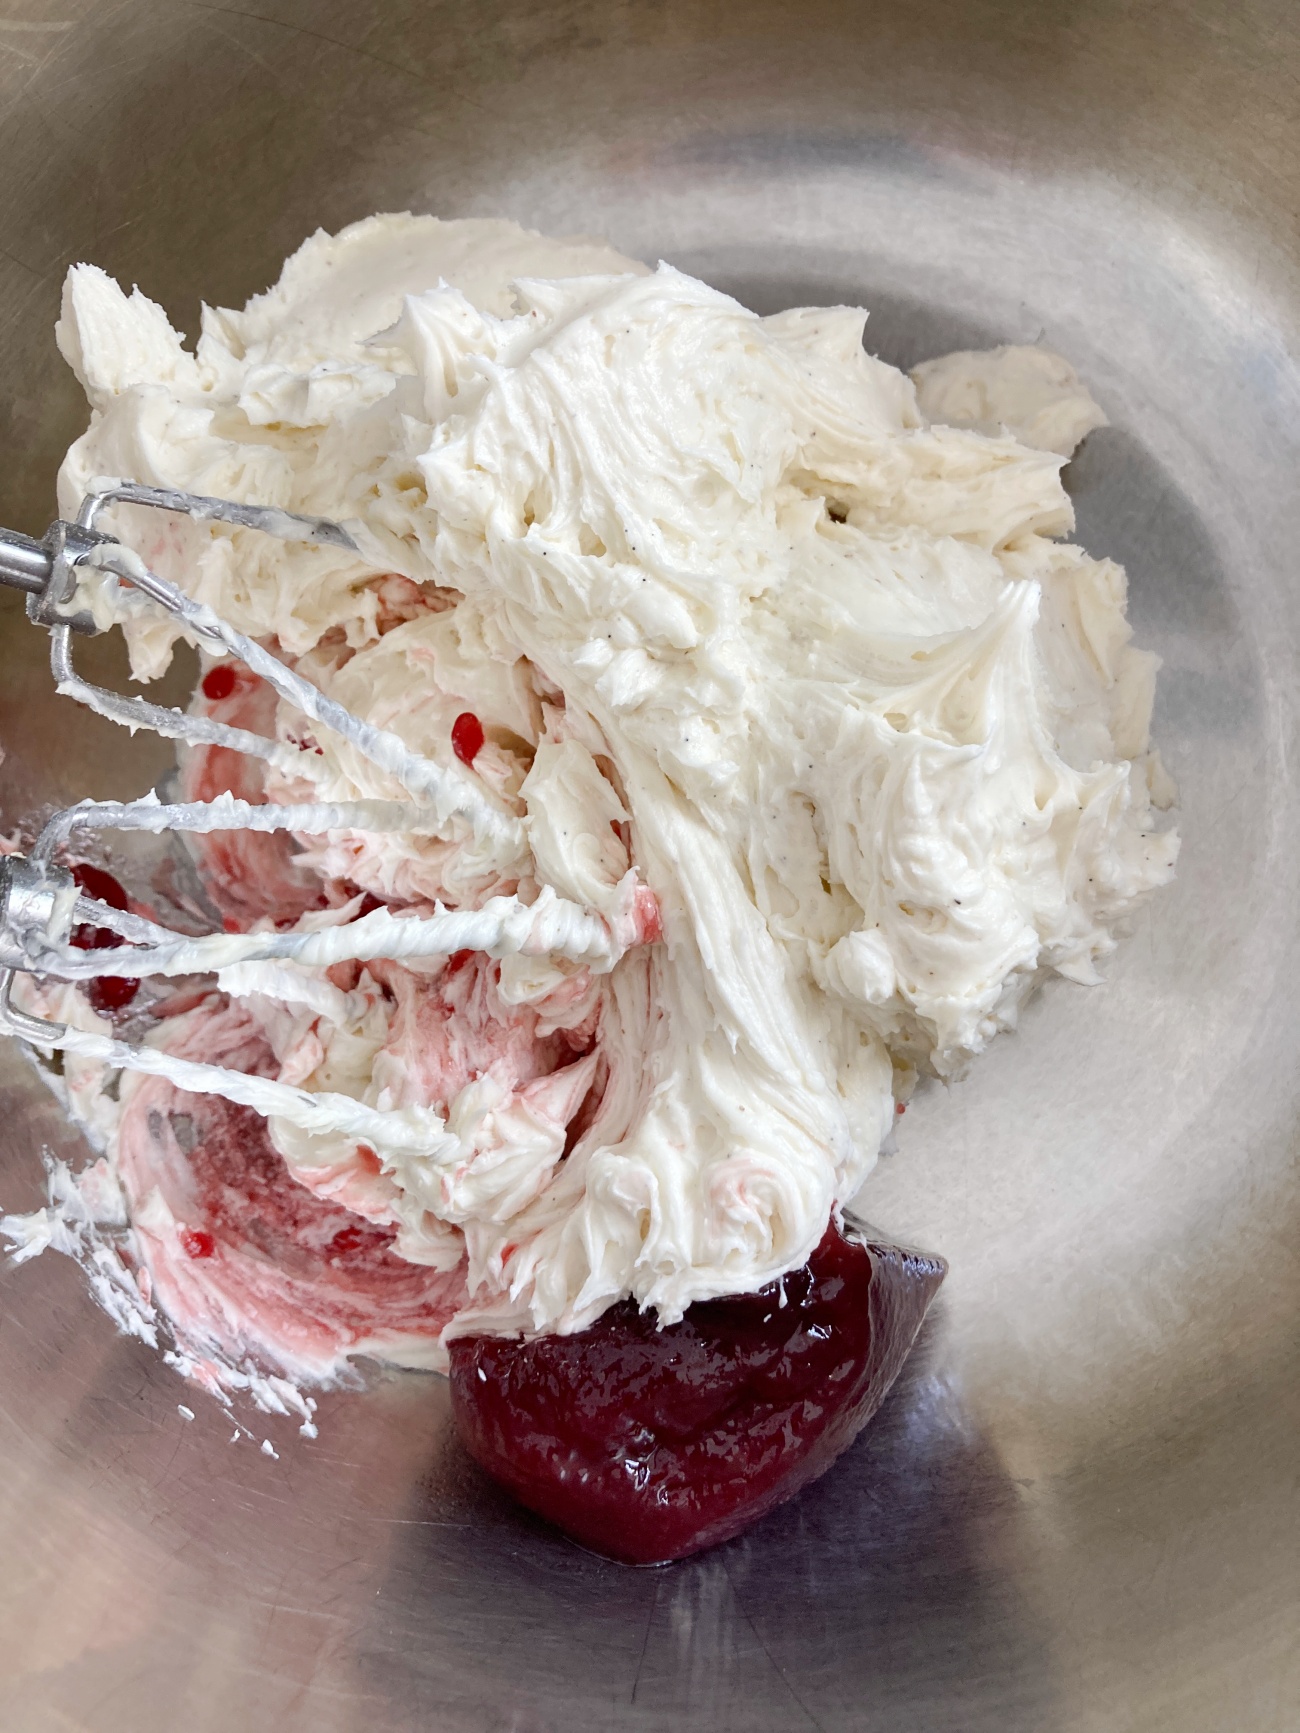 Using electric mixer incorporate 1/4 cup raspberry preserves into frosting. If desired reserve some plain frosting before mixing raspberry in to create 2 colors of icing to decorate with.